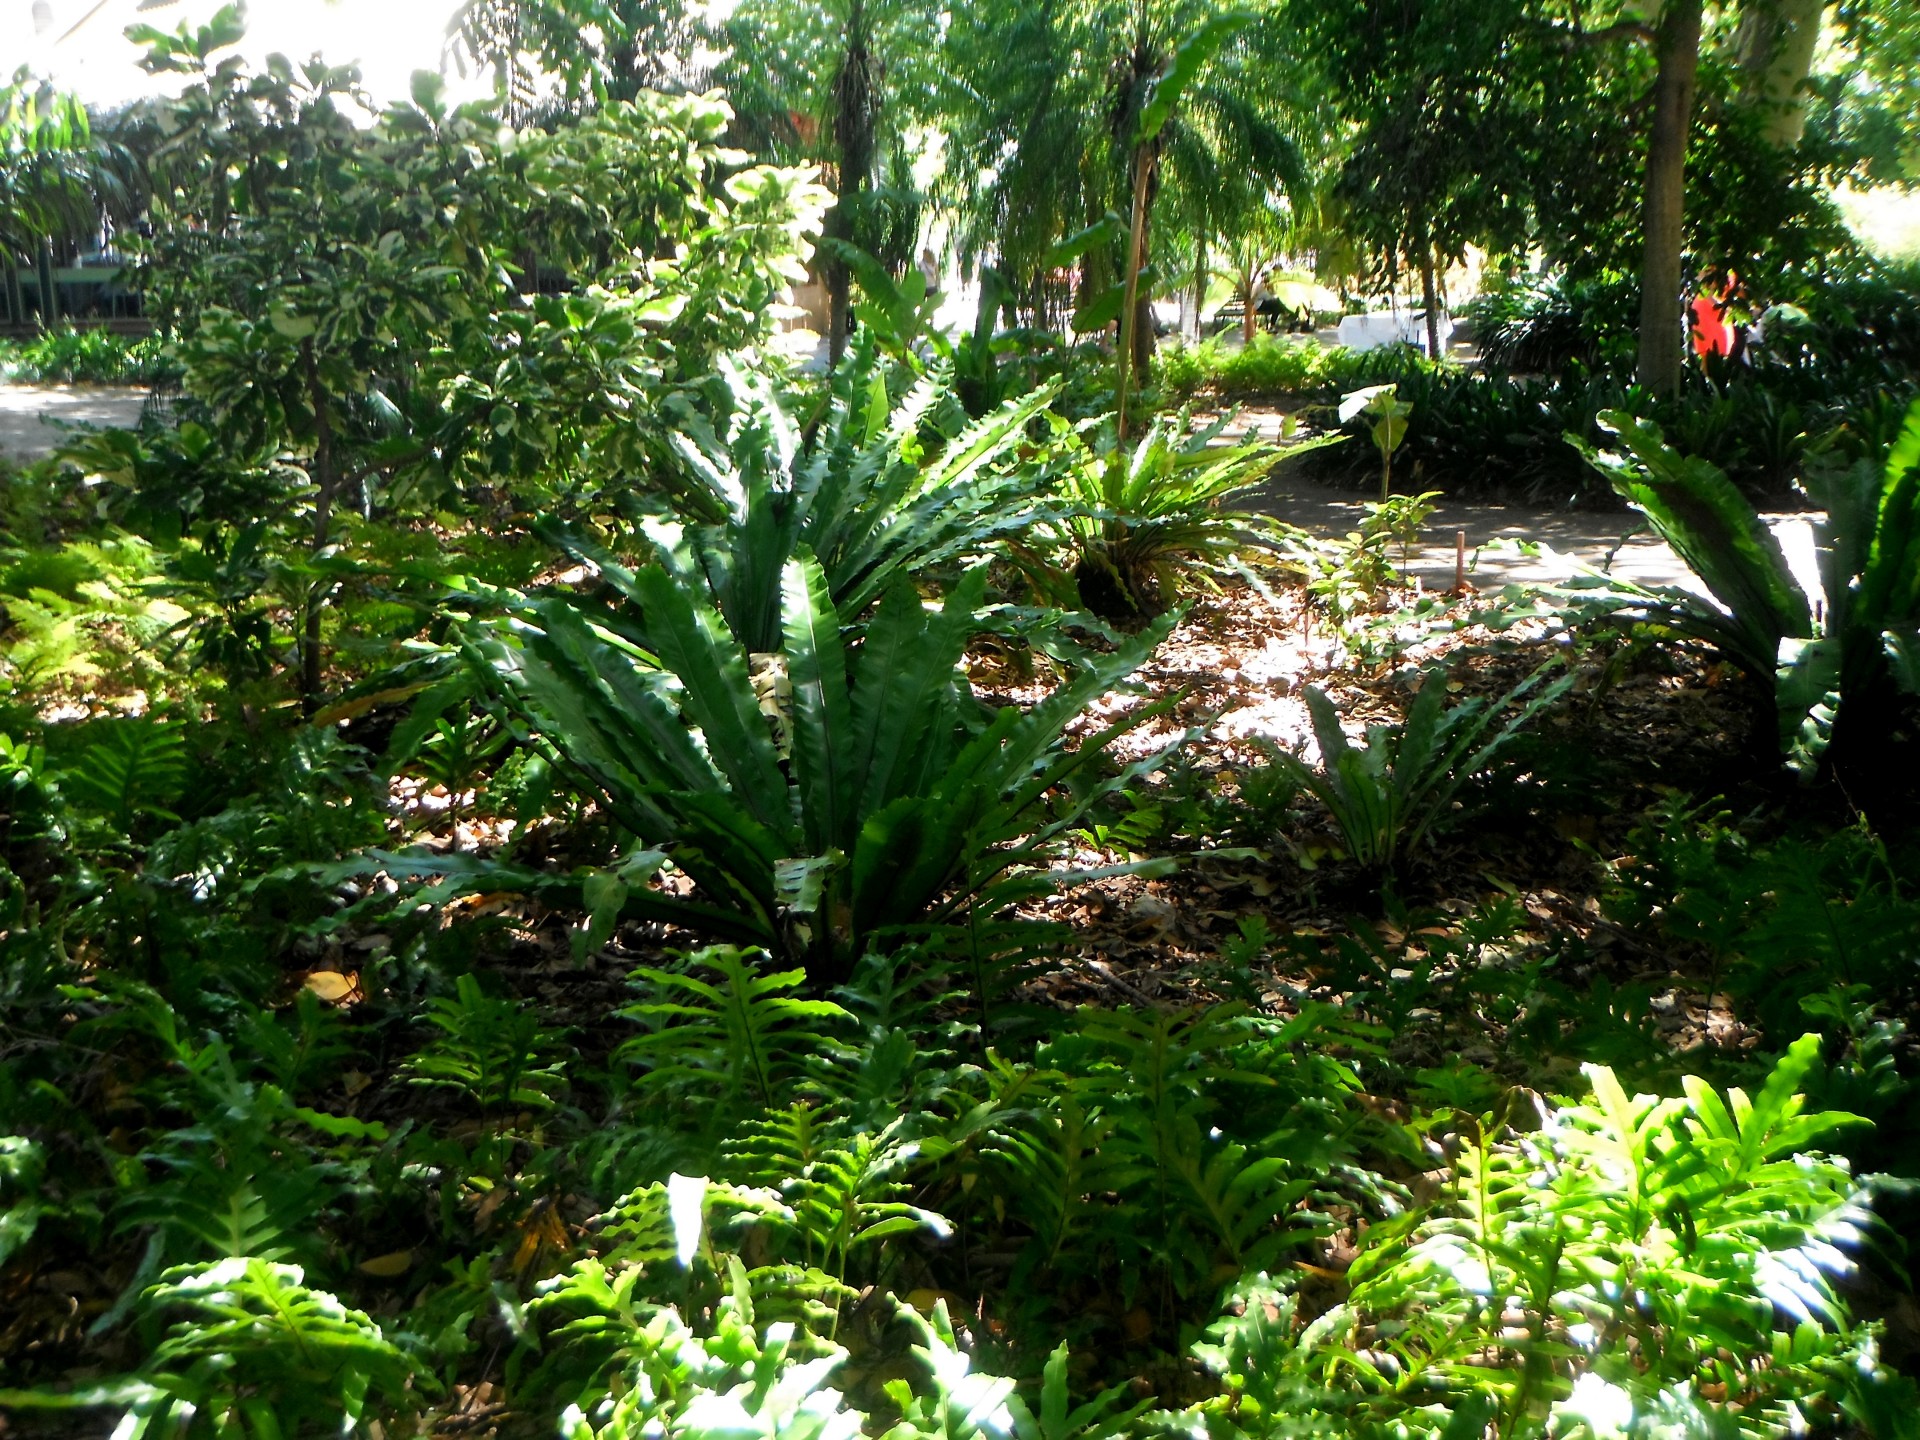 There are all kinds of plants including ferns which are mailny gronw in deep shade areas.